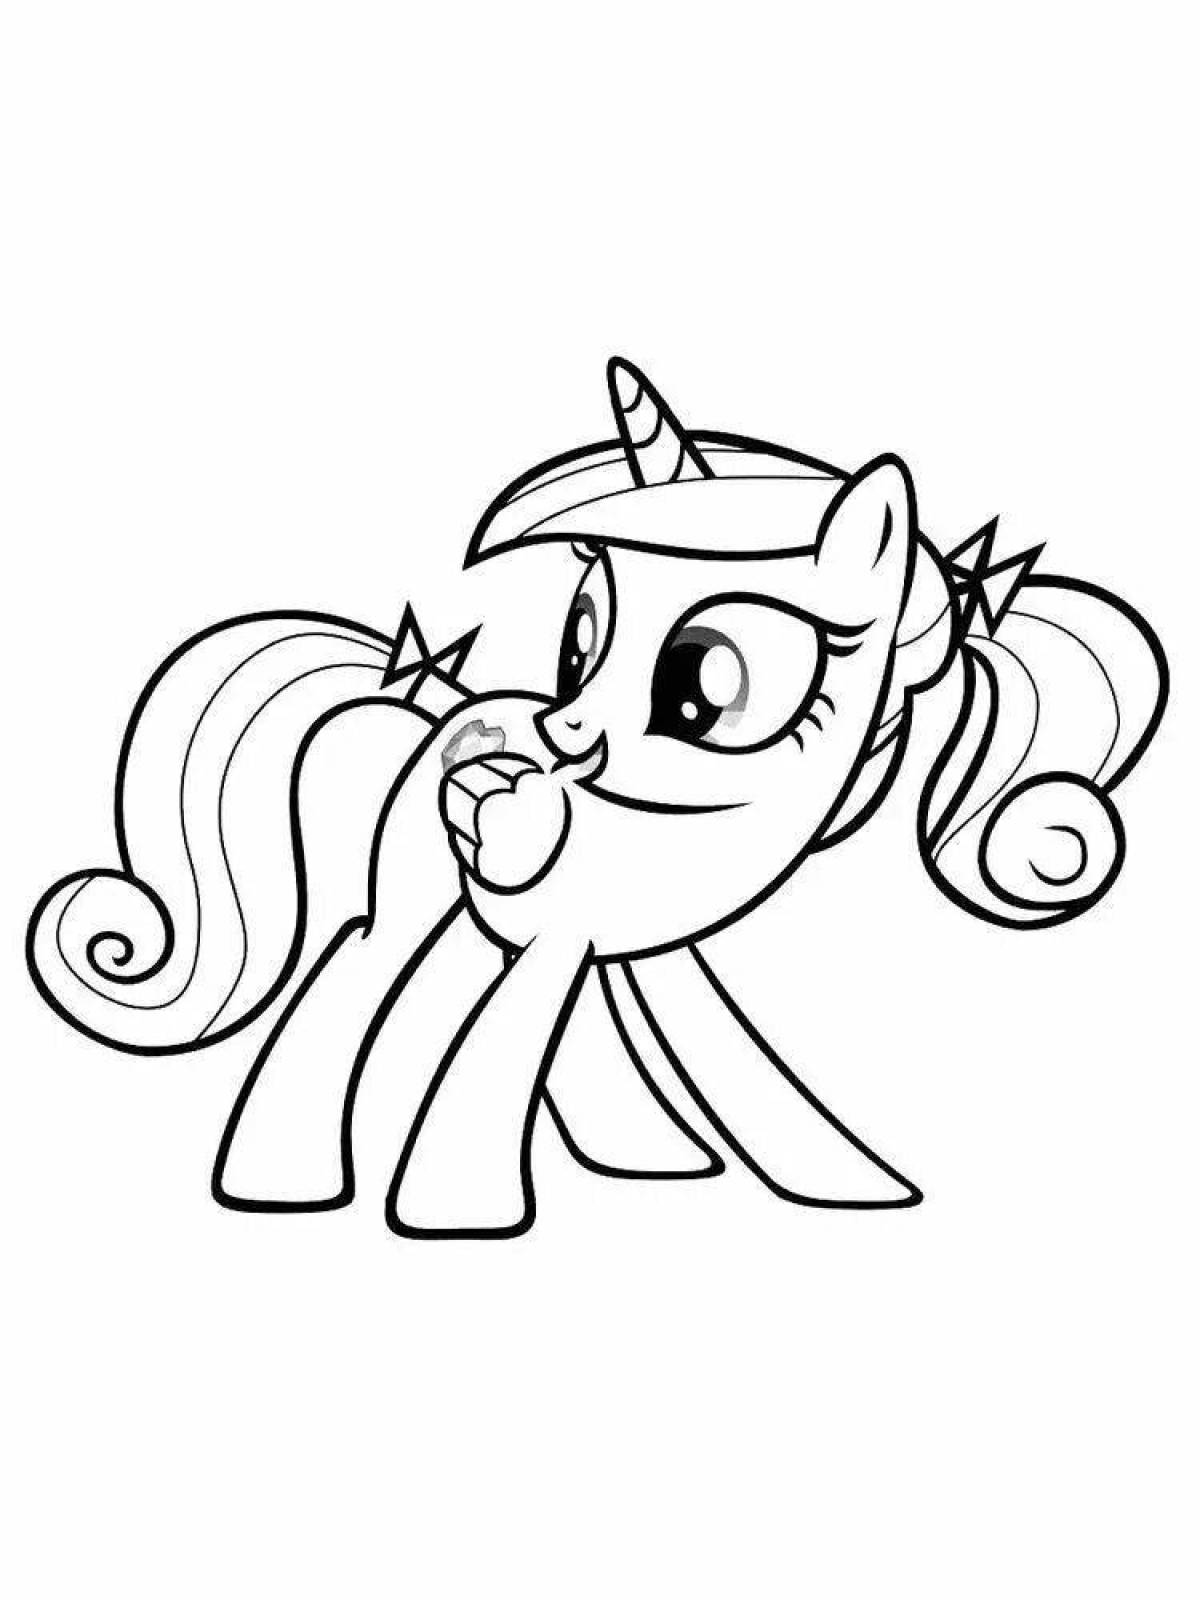 Radiant cadence pony coloring page